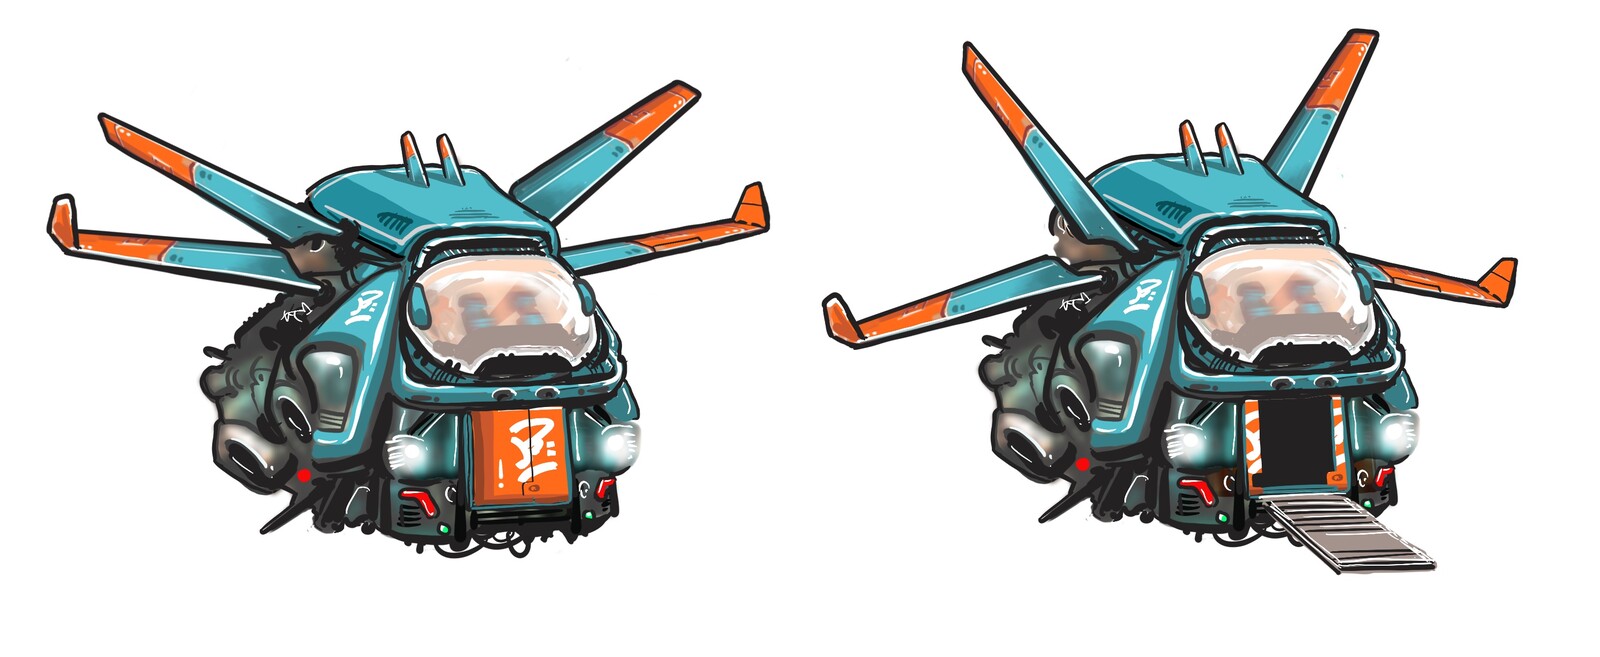 The final Shuttle design, Wings and Doors etc all on separate layers to facilitate animation in AfterEffects.